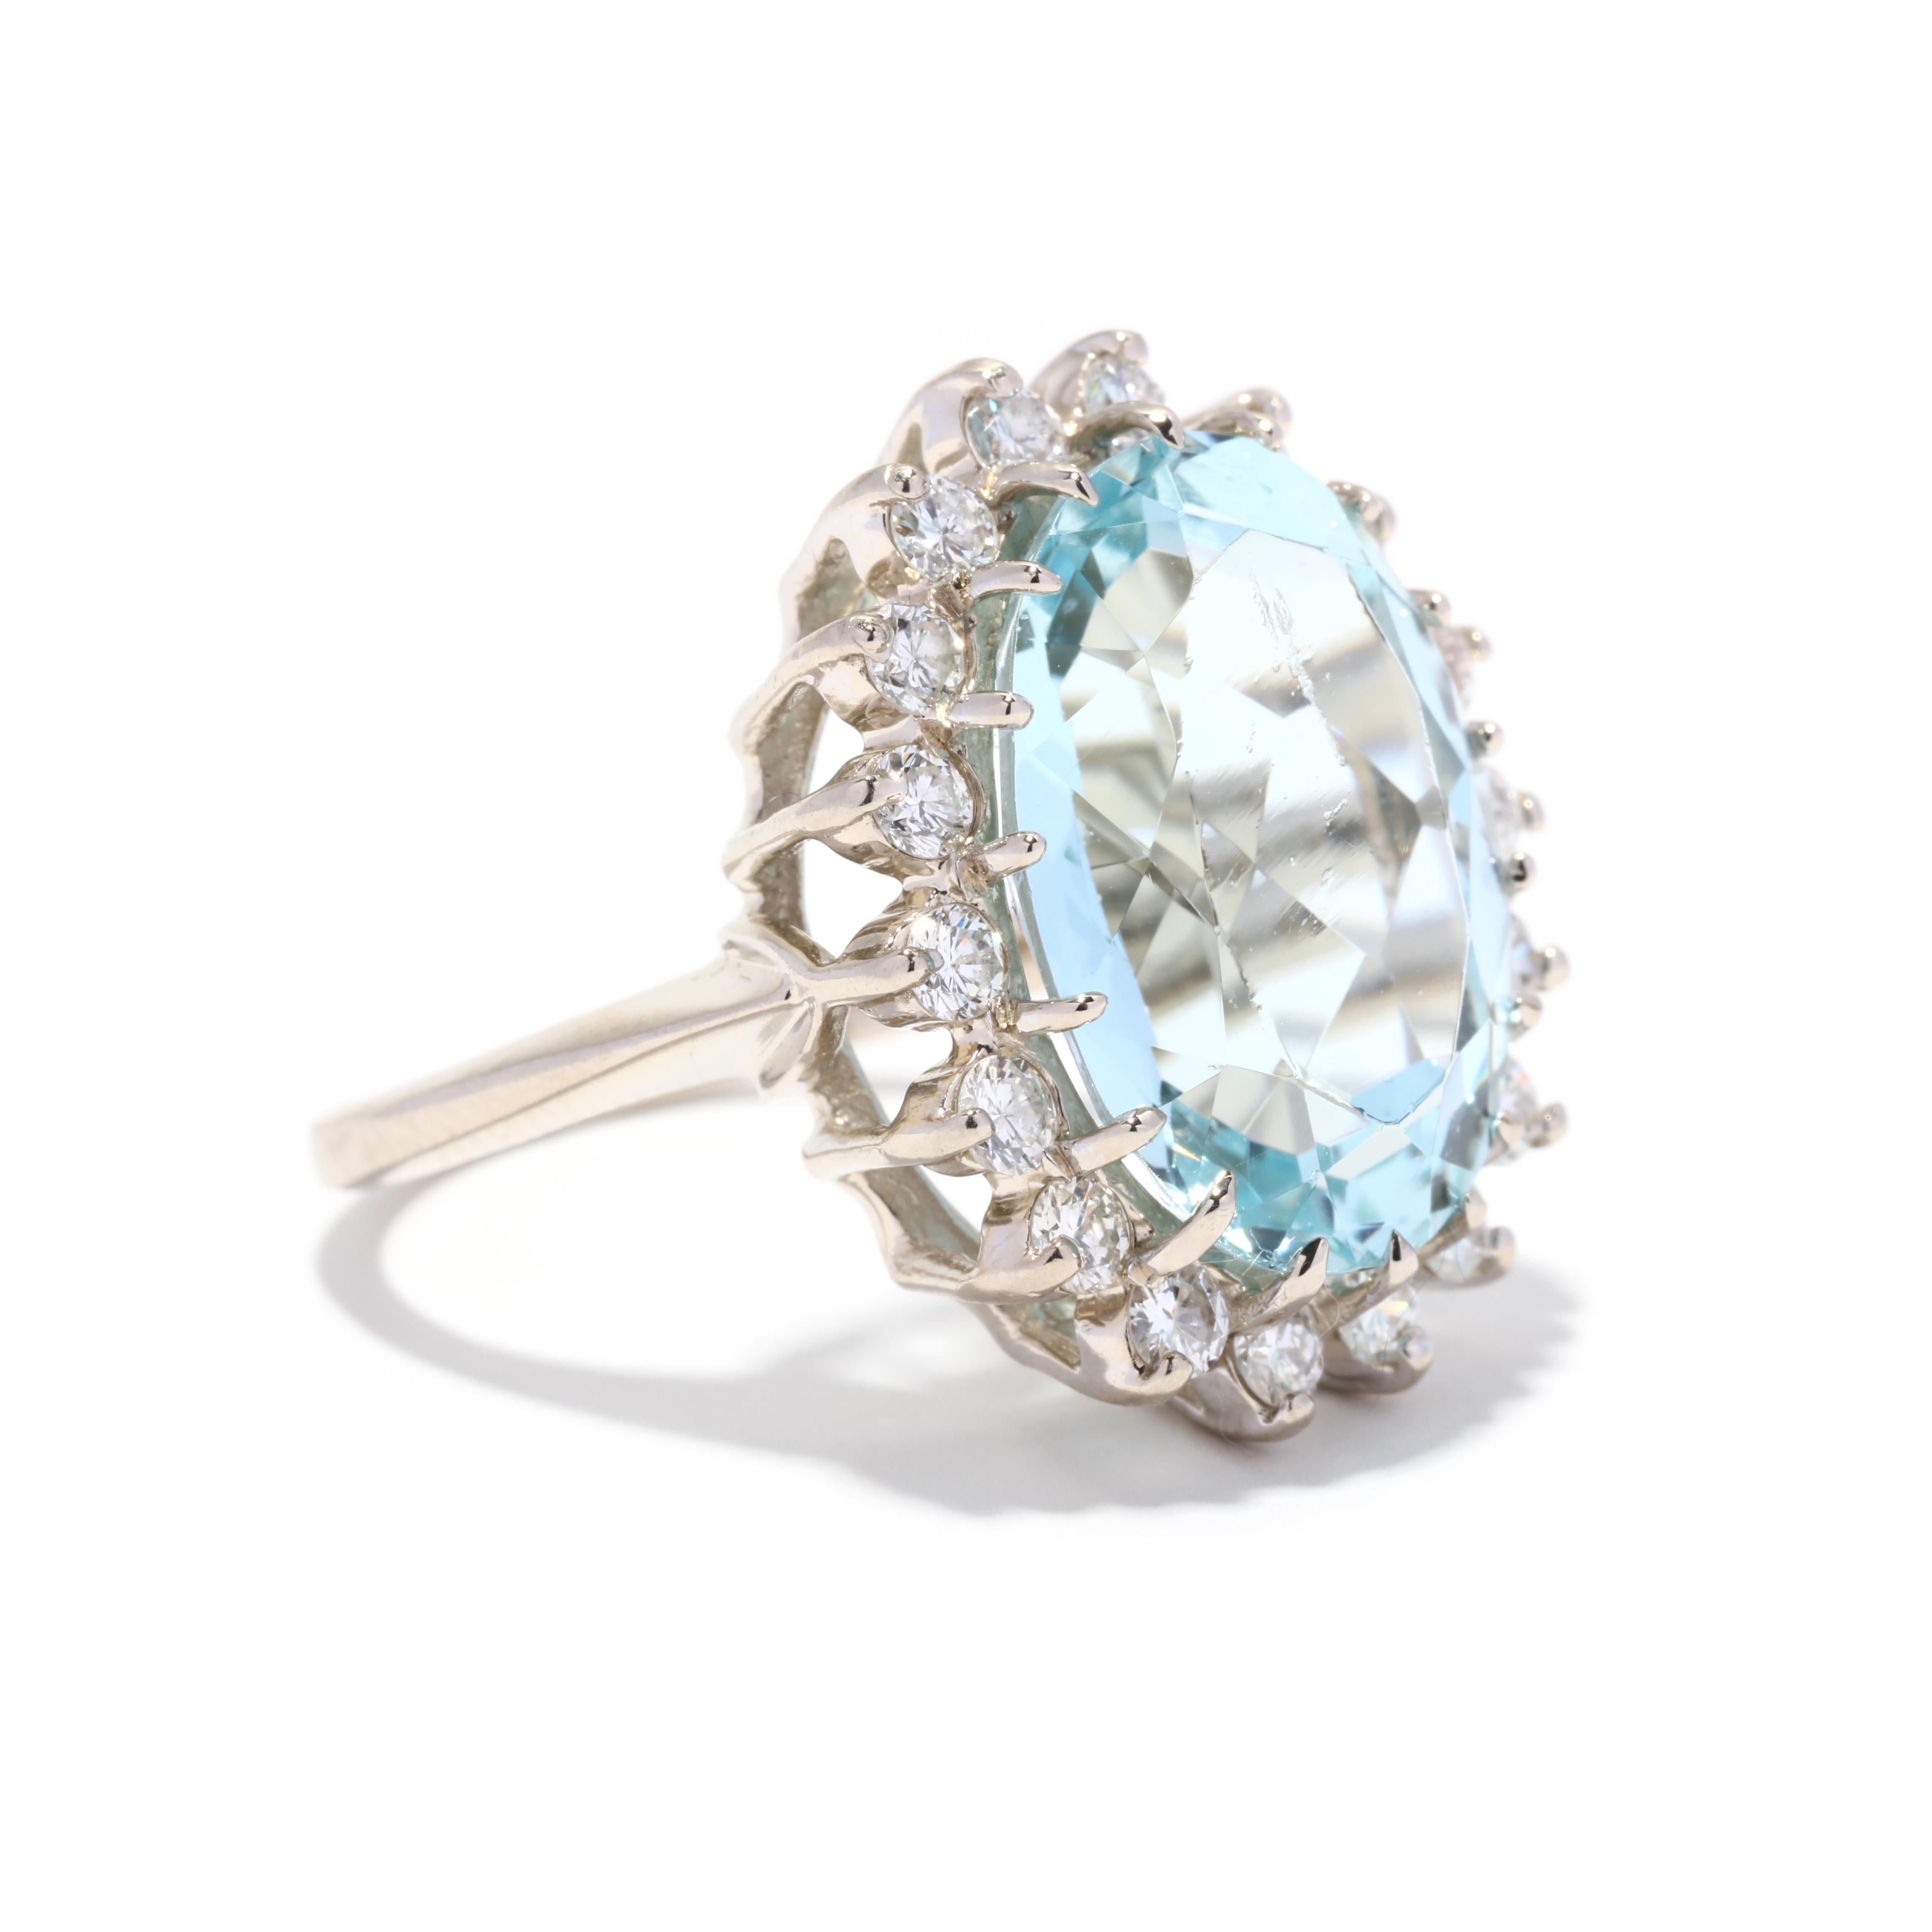 A vintage 14 karat white gold large aquamarine and diamond halo ring. This cocktail ring features a prong set oval cut aquamarine weighing approximately 9 carats surrounded by a halo of round brilliant cut diamonds weighing approximately 1 total